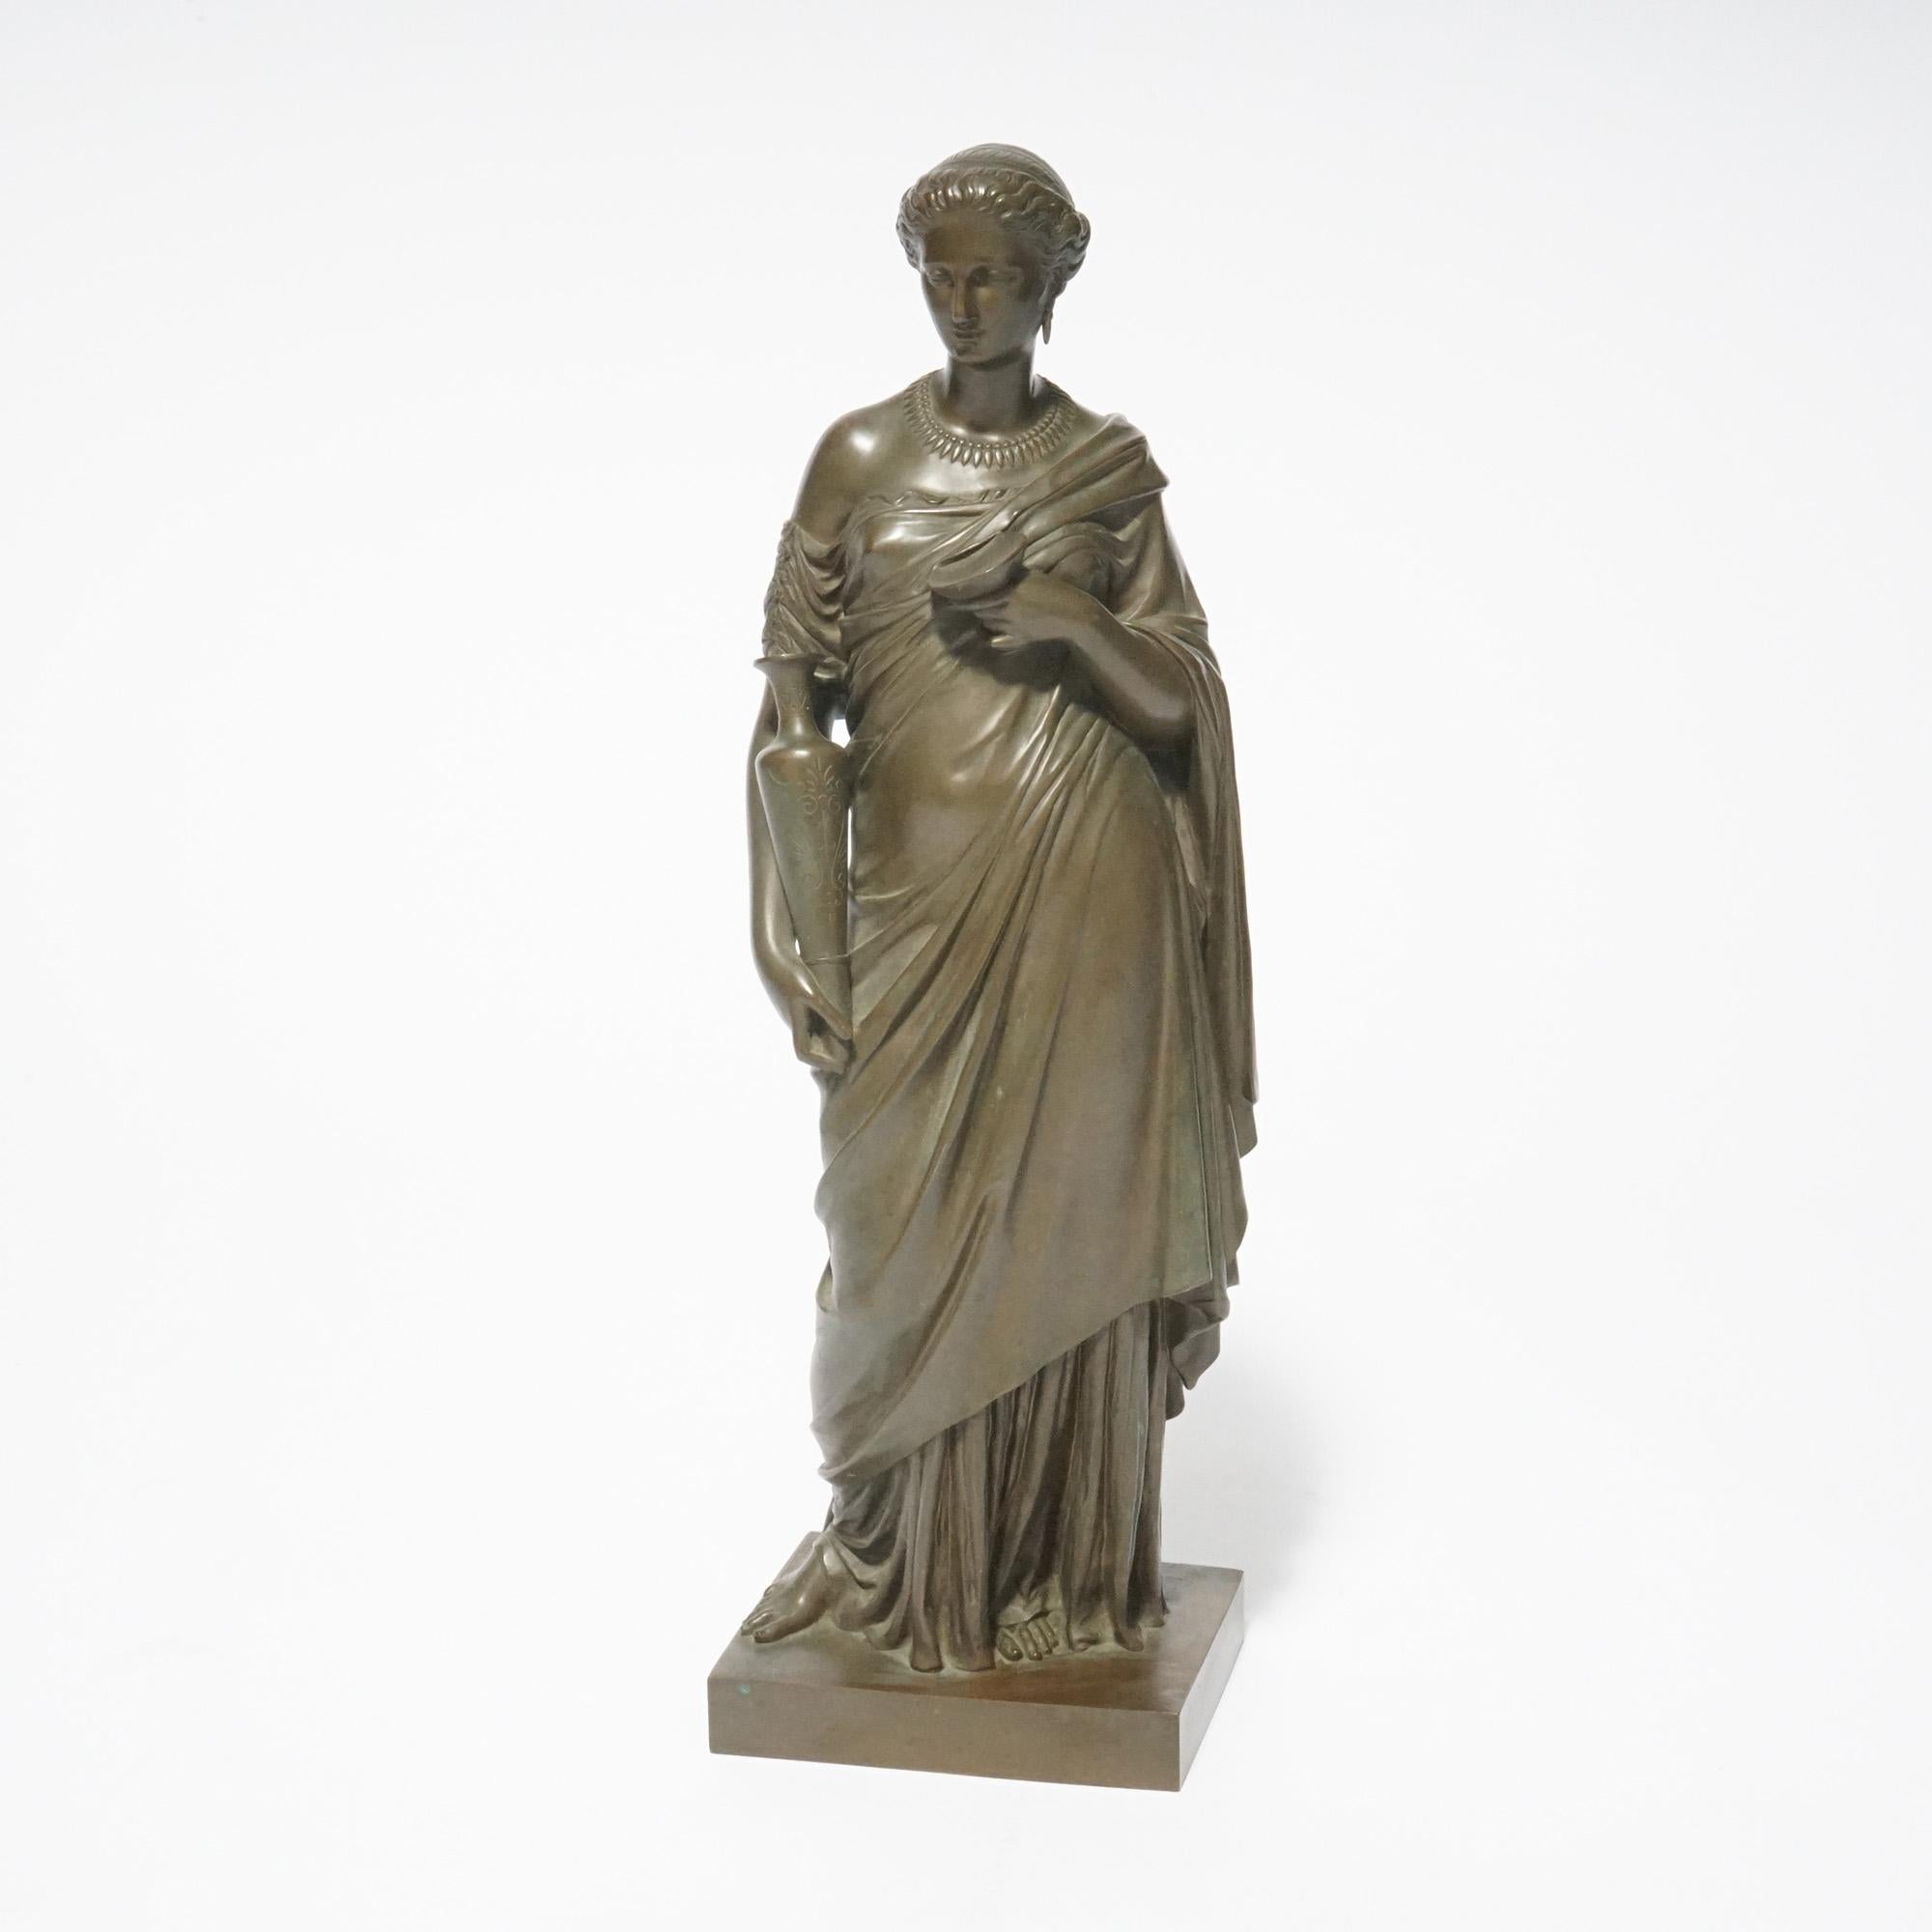 An antique French cast bronze sculpture by Barbedienne Foundry depicts portrait of a Classical woman, foundry stamp on base, 19th century
 
Measures- 24''H x 7.5''W x 6''D